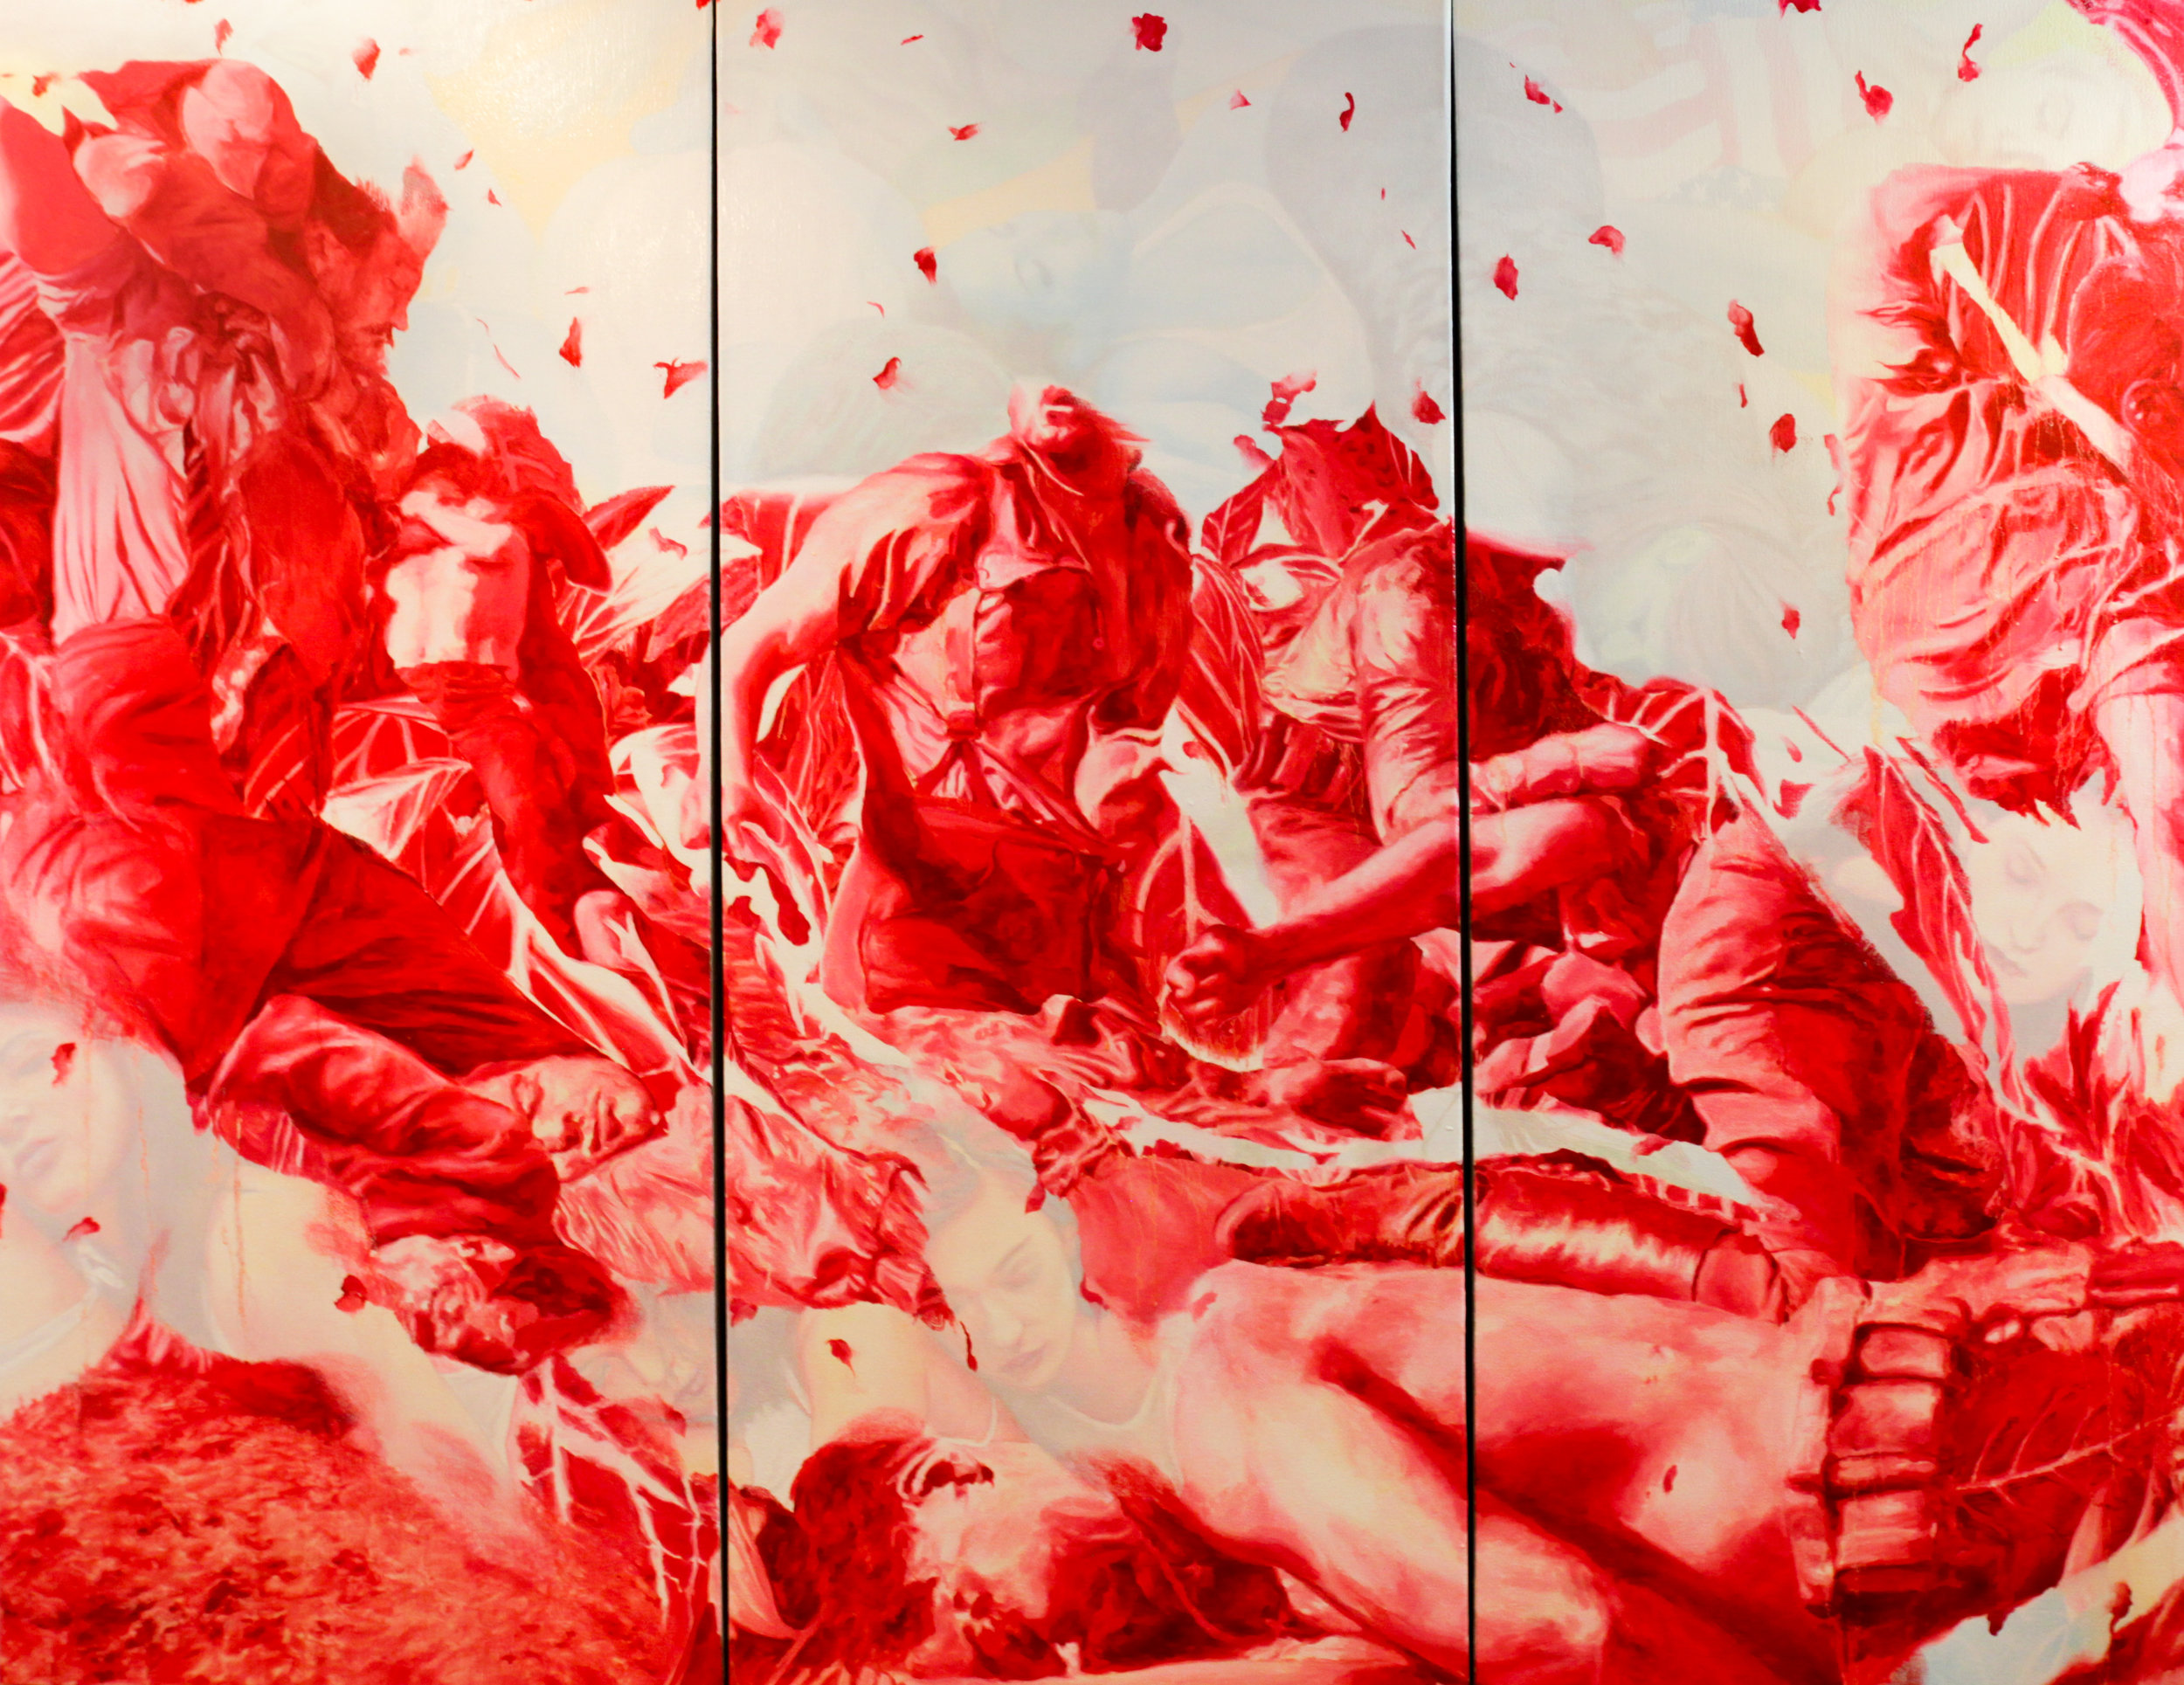  56” x 72” Oil on 3 Canvases 